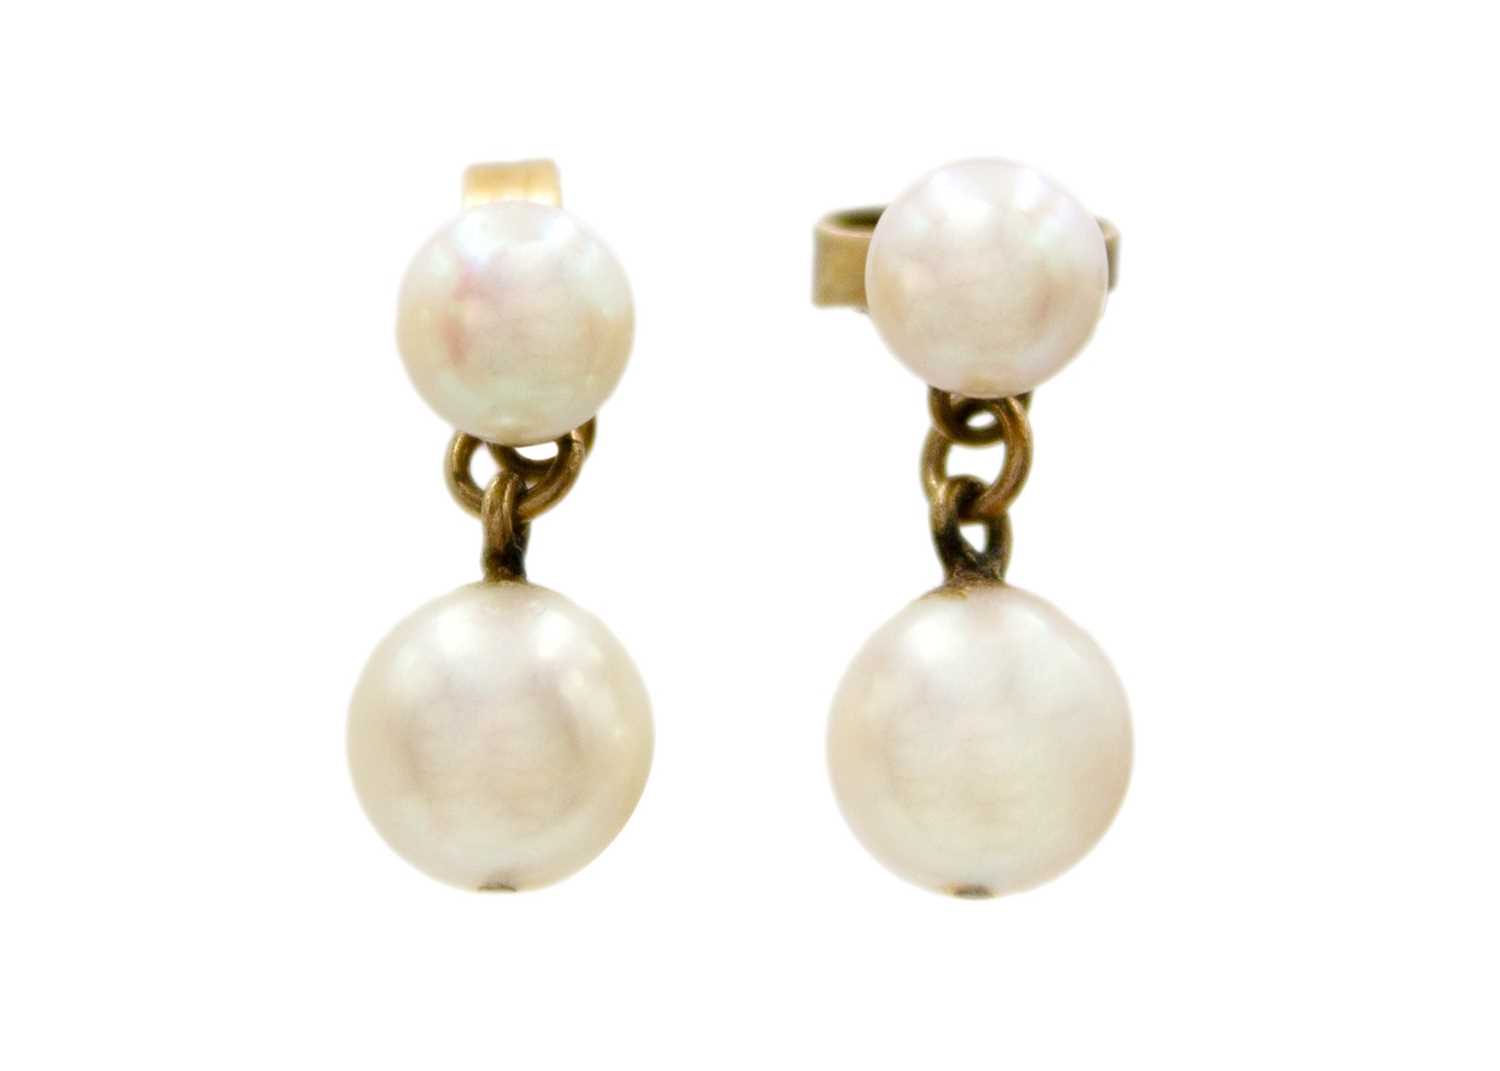 A pair of cultured white pearl stud earrings with 18ct mount by Tiffany & Co. - Image 2 of 3